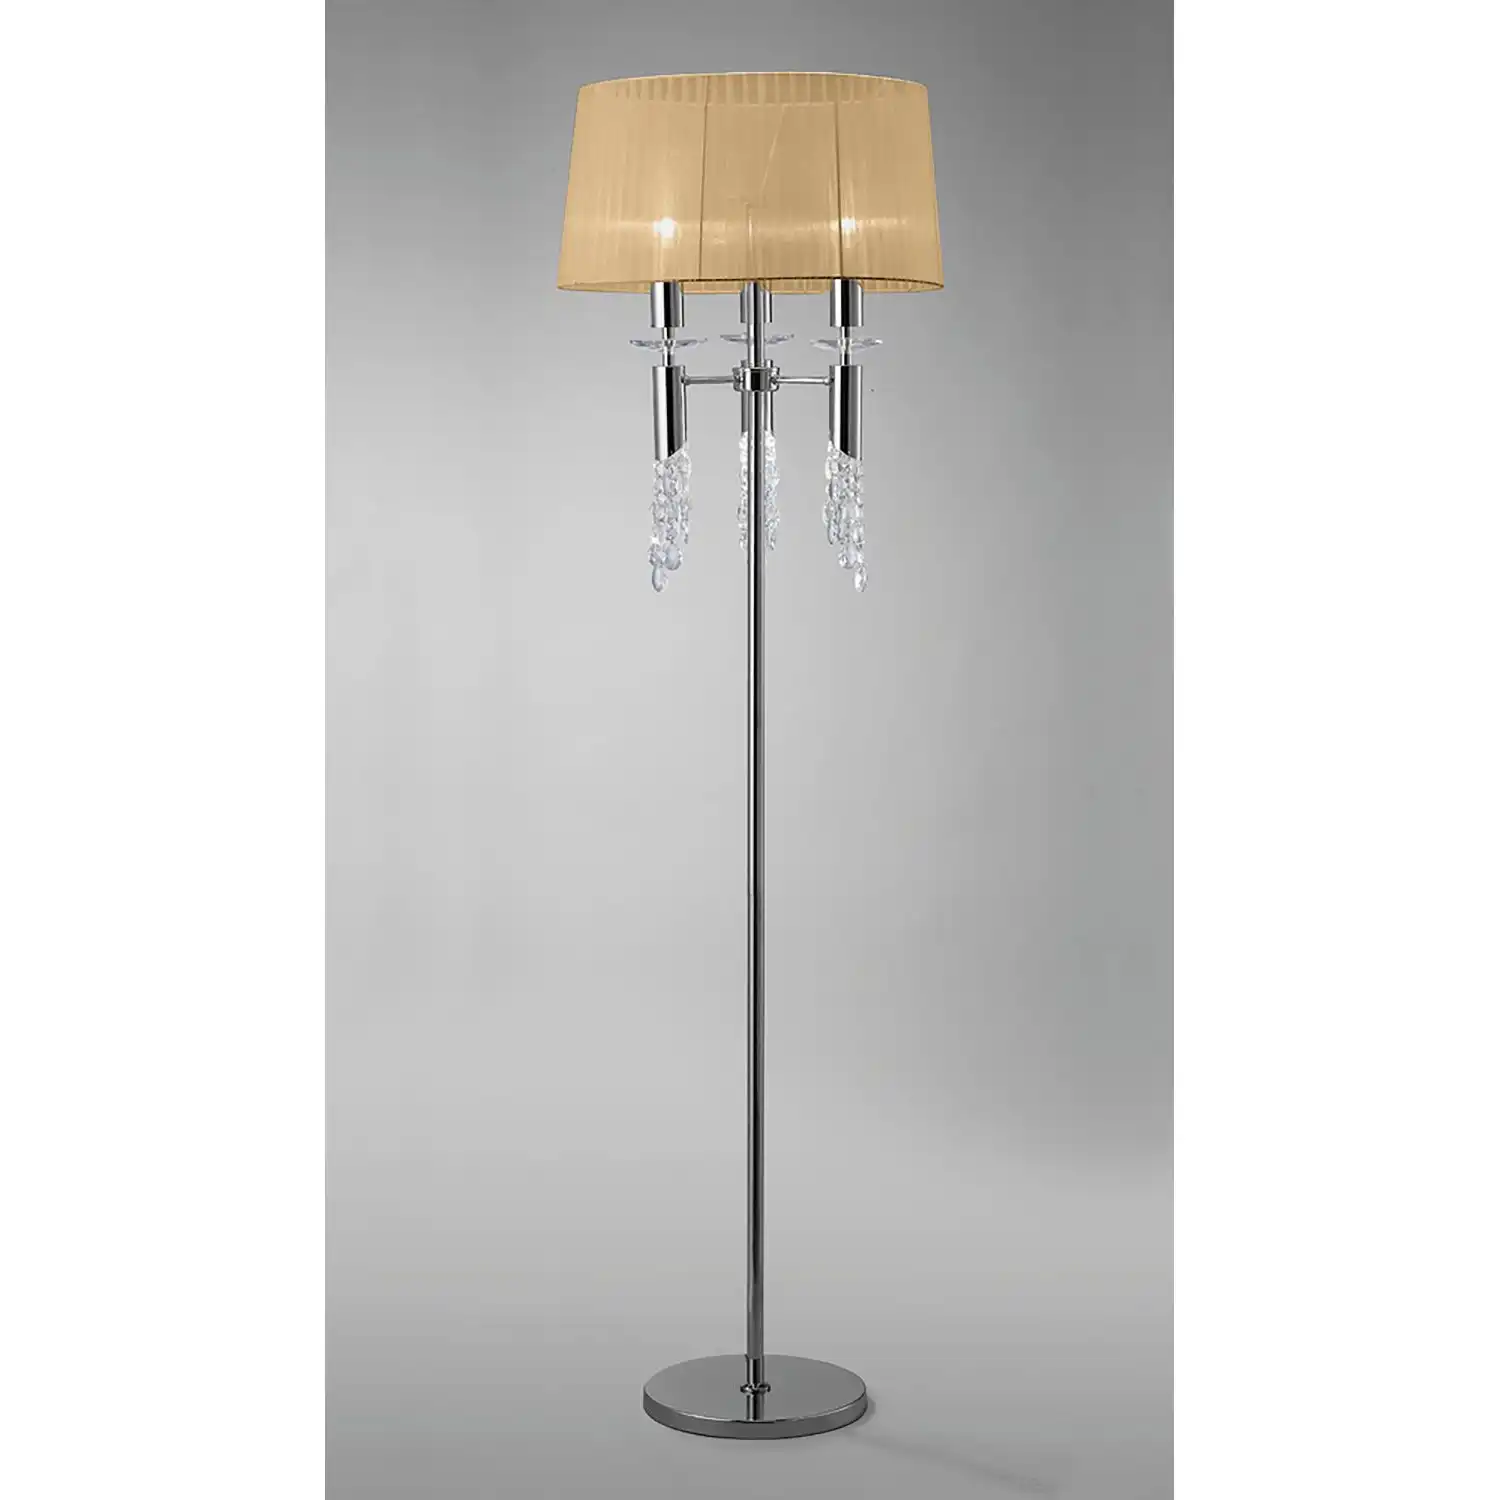 Tiffany Floor Lamp 3+3 Light E27+G9, Polished Chrome With Soft Bronze Shade And Clear Crystal